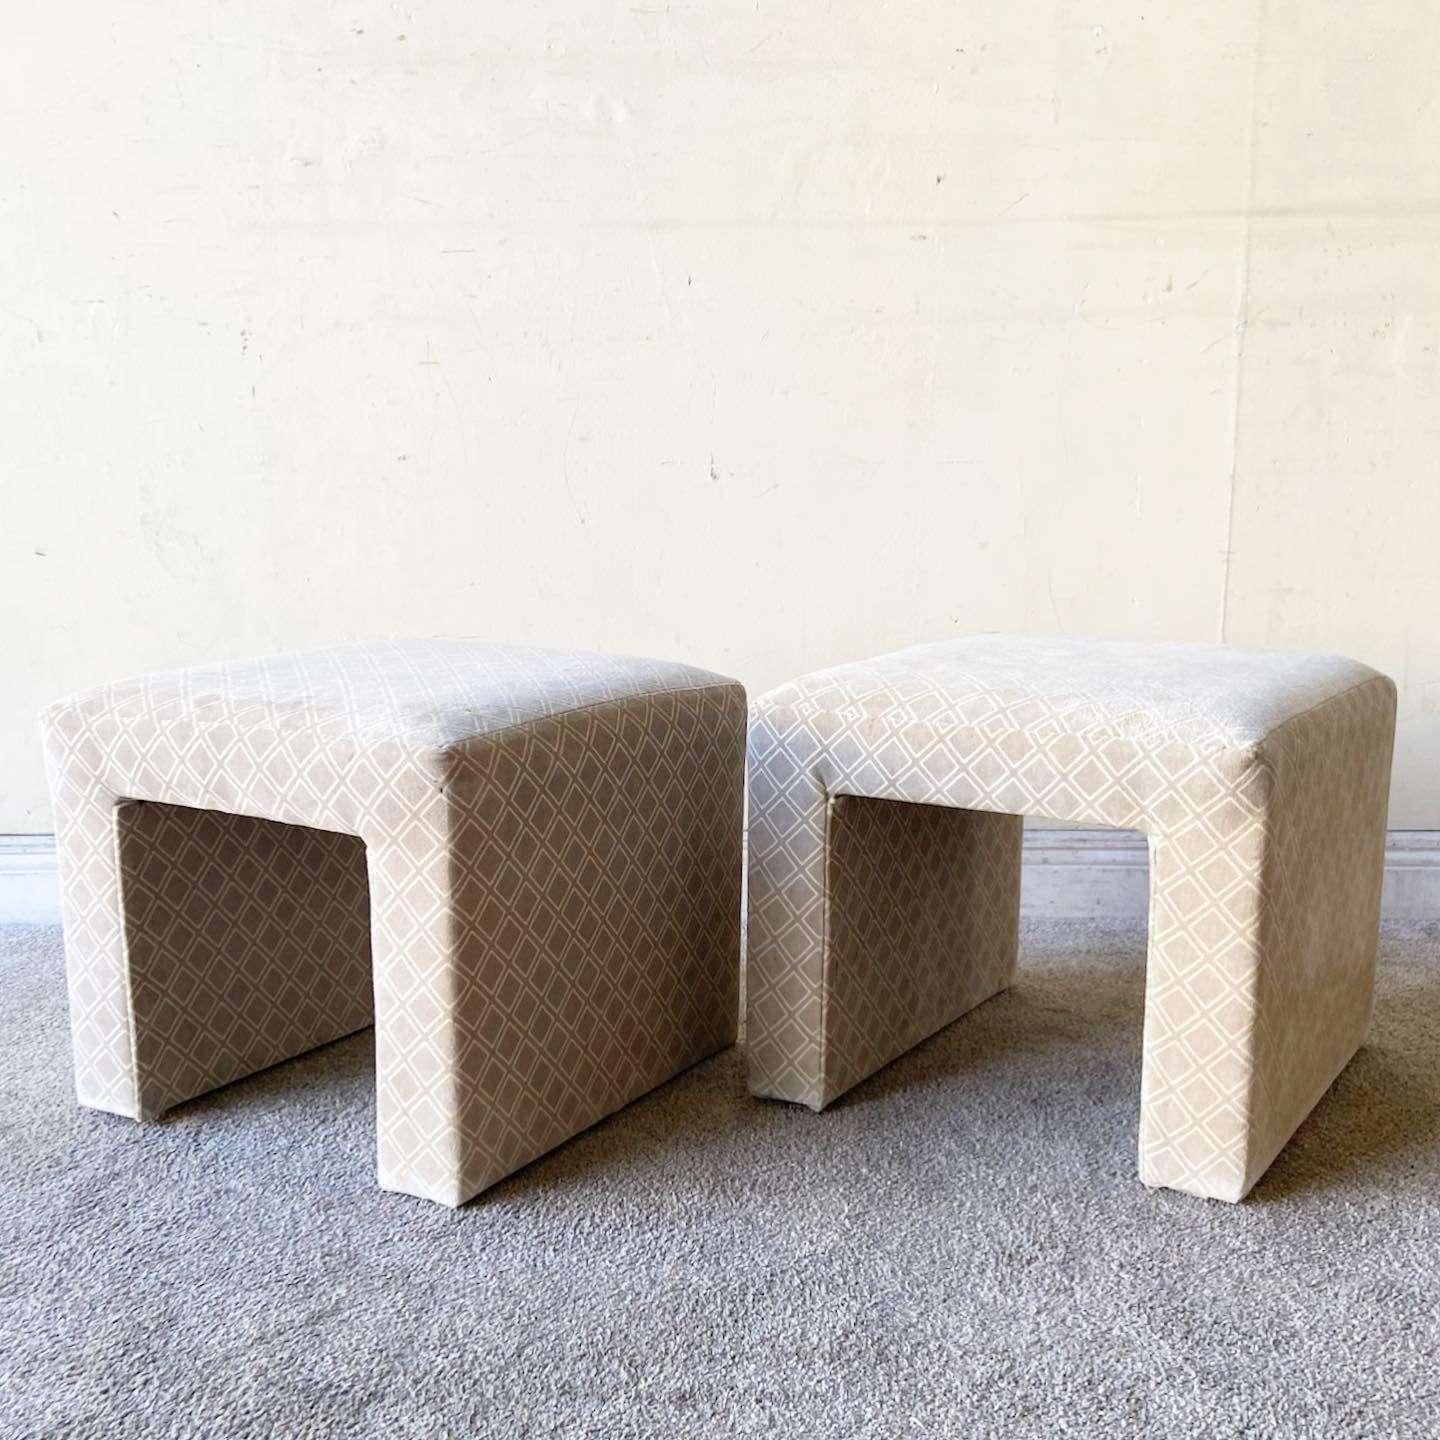 Amazing pair of vintage postmodern fabric low stools. Each feature a grey and beige fabric.
